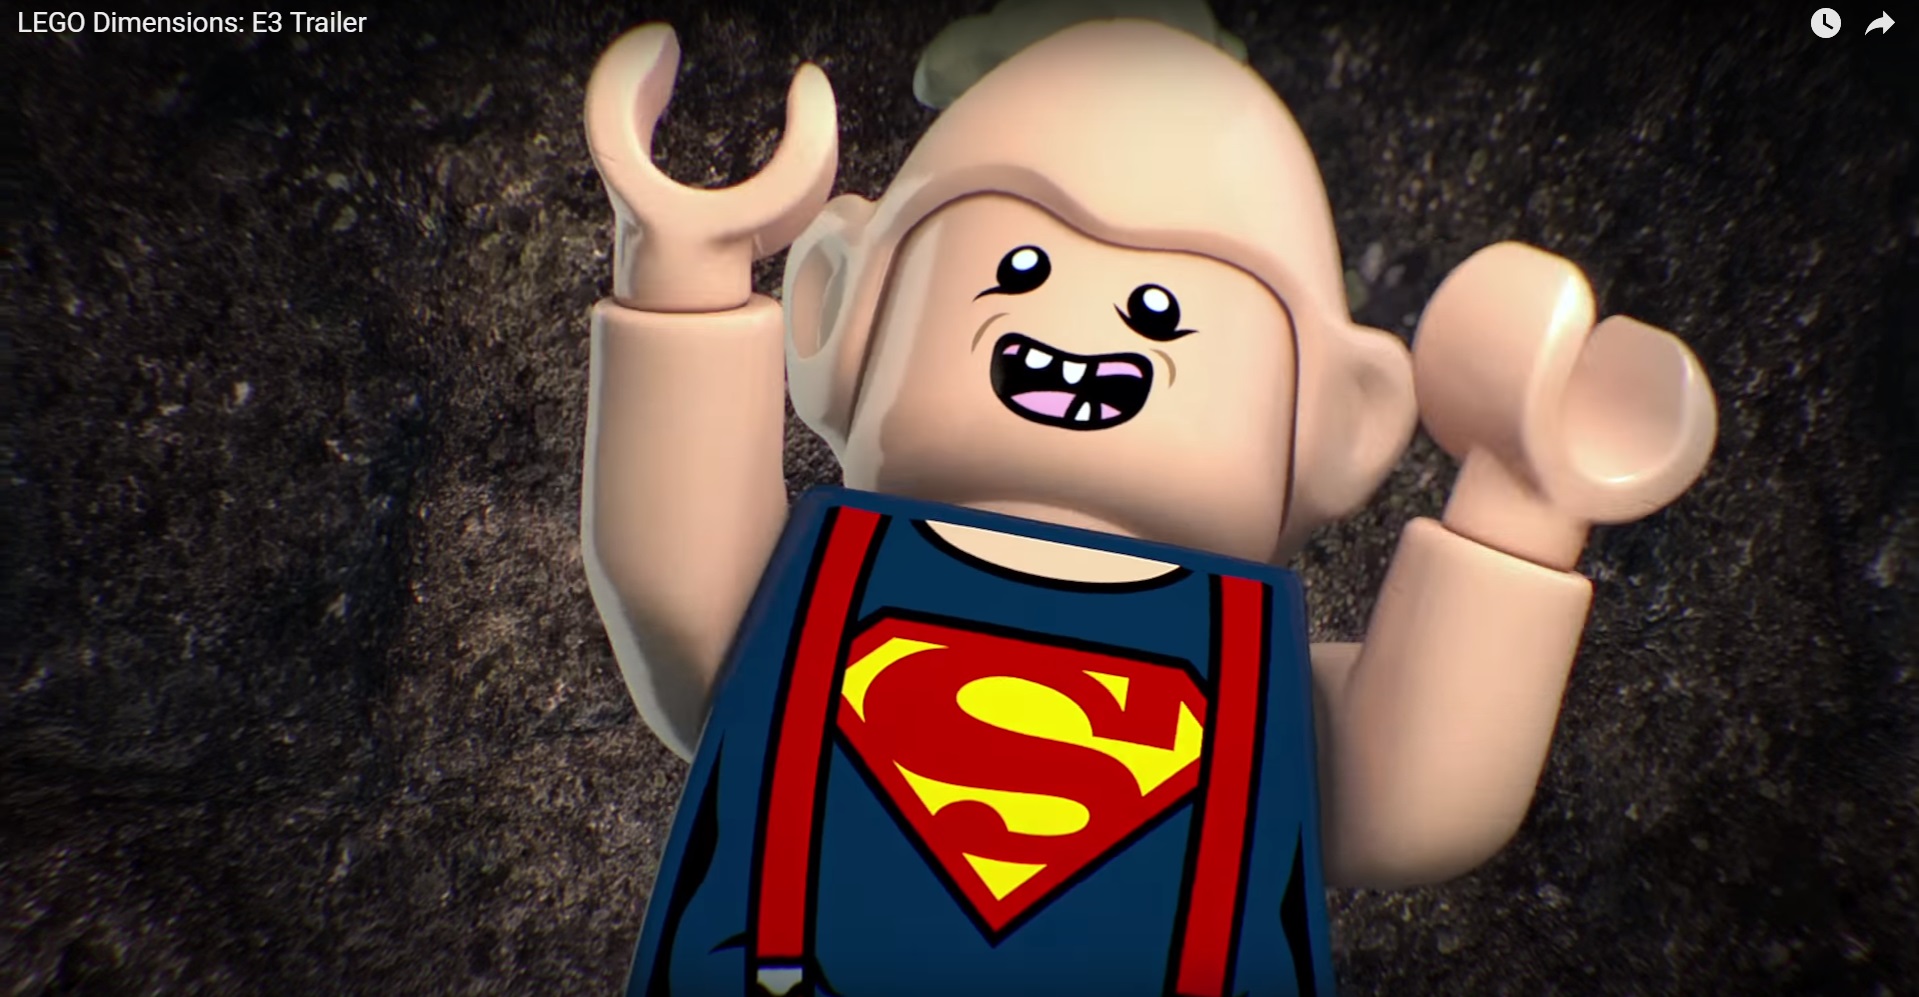 LEGO Dimensions Phase 2 Announced – Doubling down on pop culture! – Jay's Brick Blog